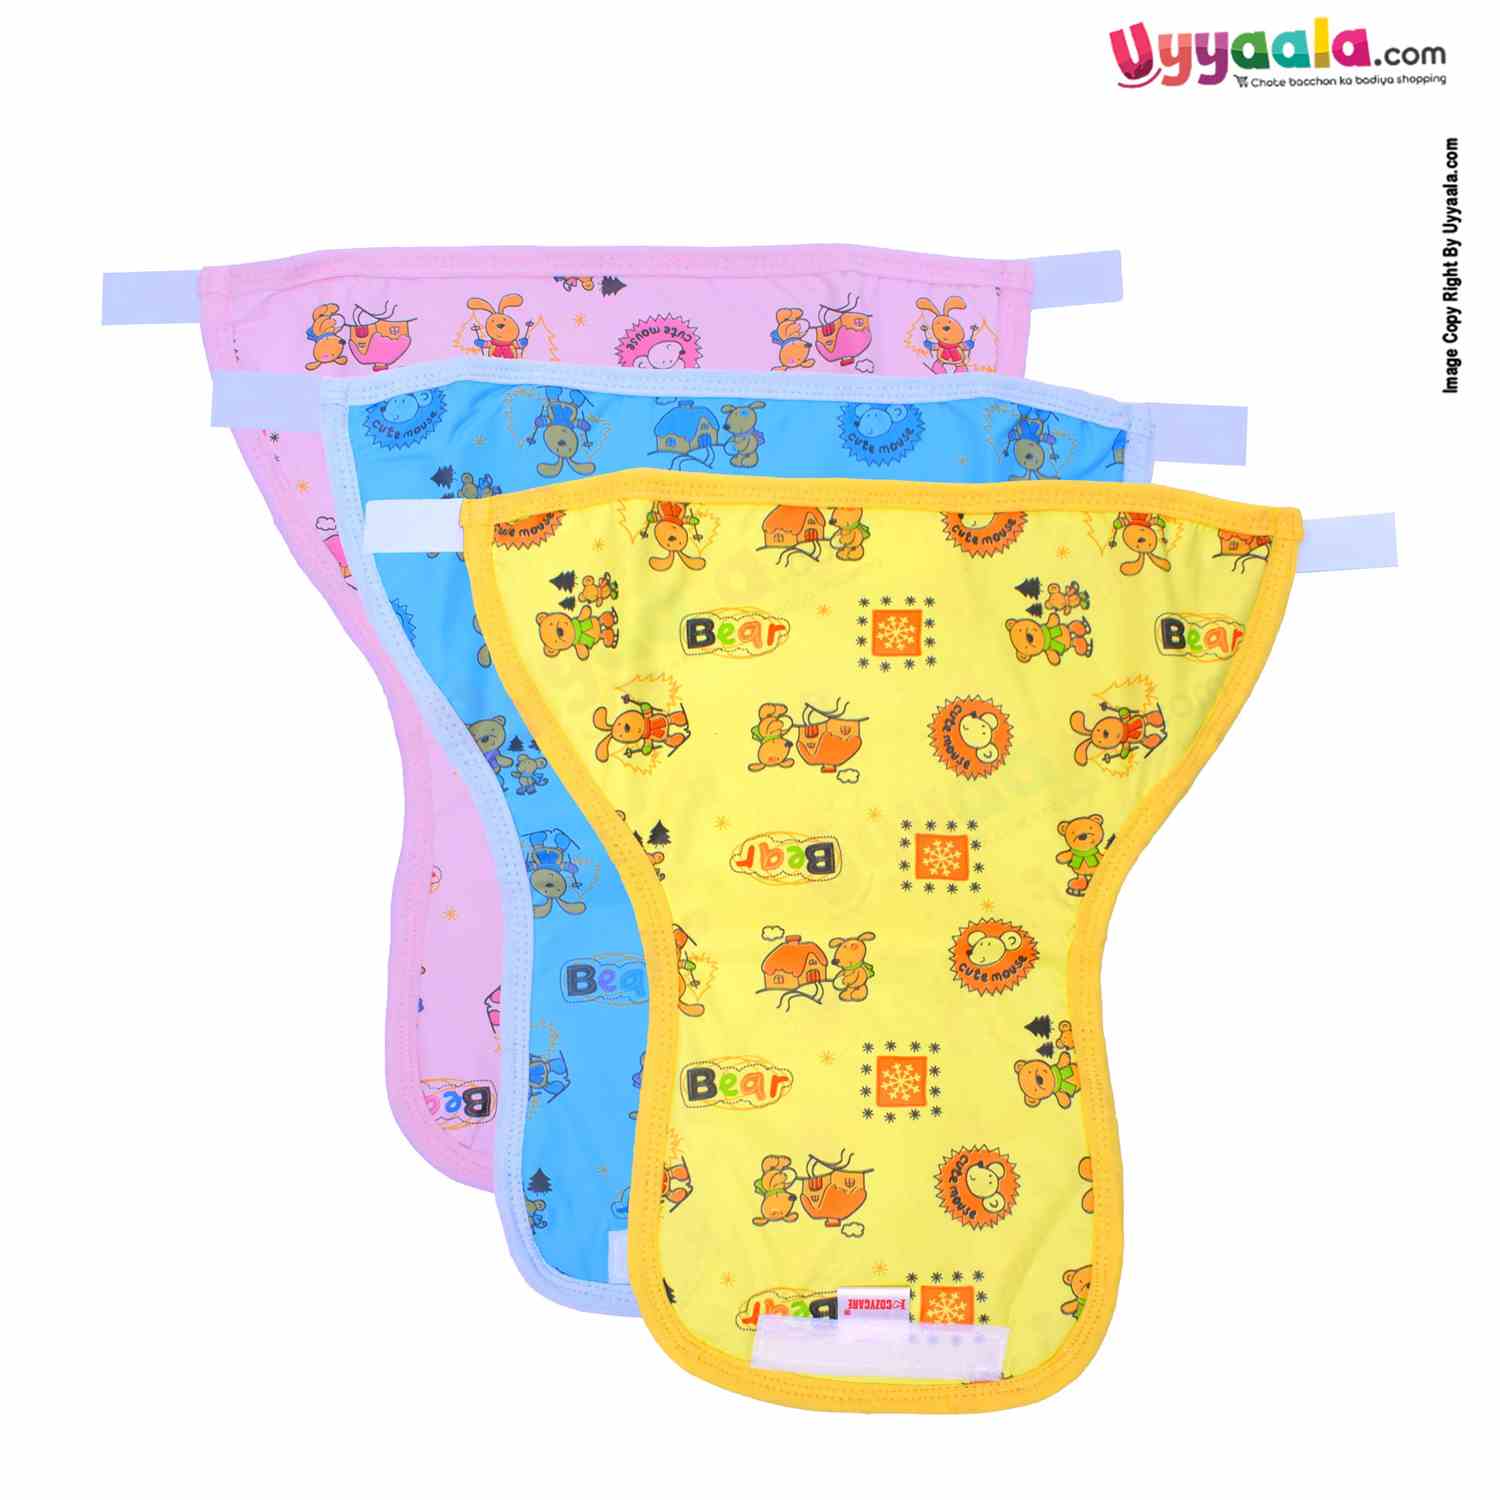 COZYCARE Washable Diapers Plastic, Velcro Bear Print Pink, Blue & Yellow without Pads- 3P Set (S)